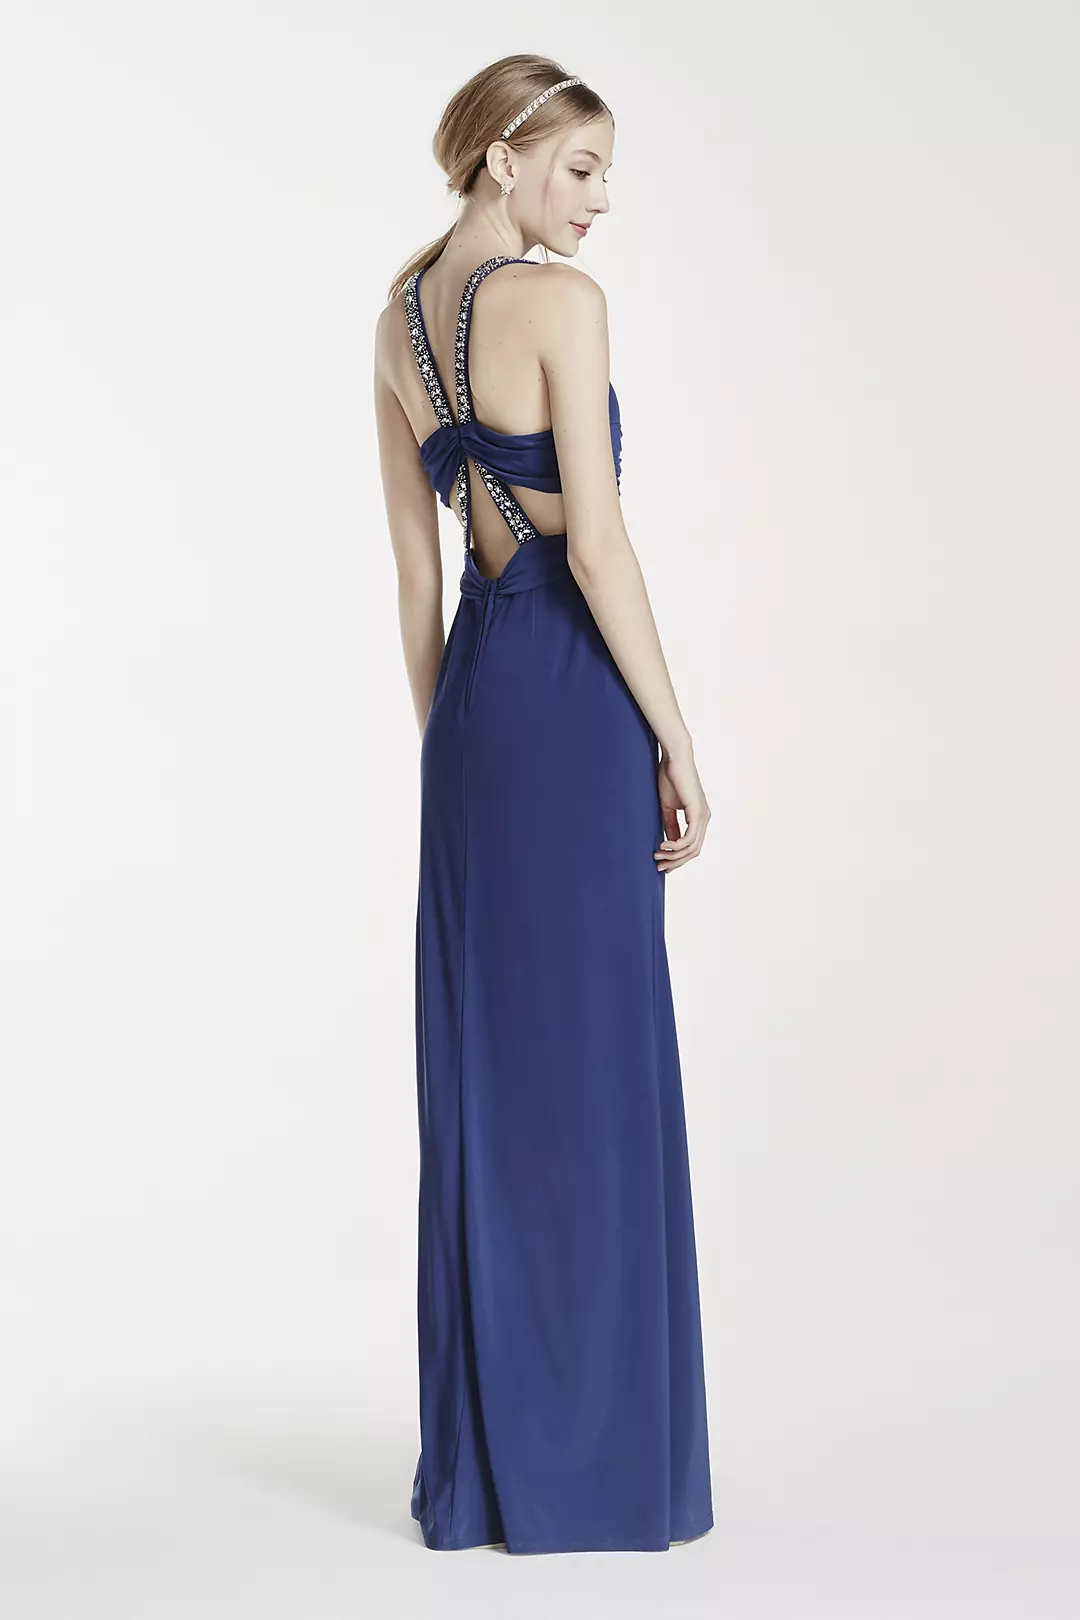 Embellished Strappy Back Dress with Ruched Waist Image 2